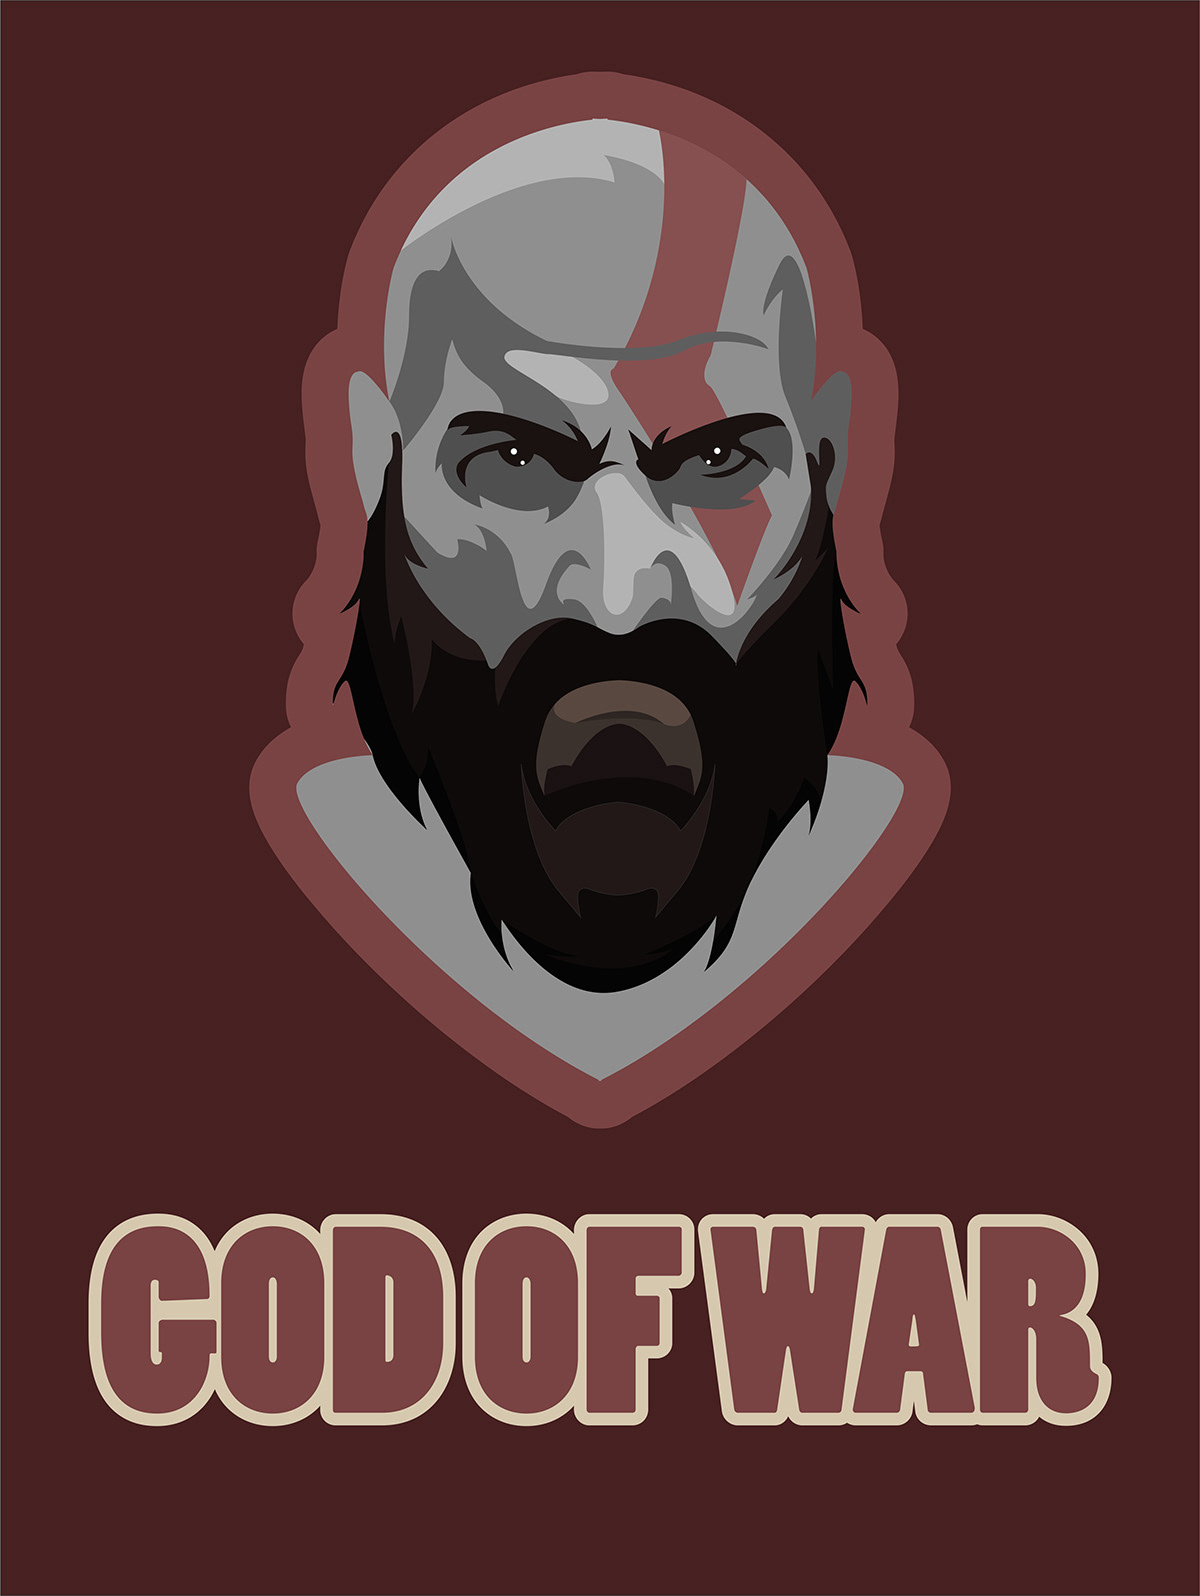 This is the artwork of a character called Kratos of God Of War game.